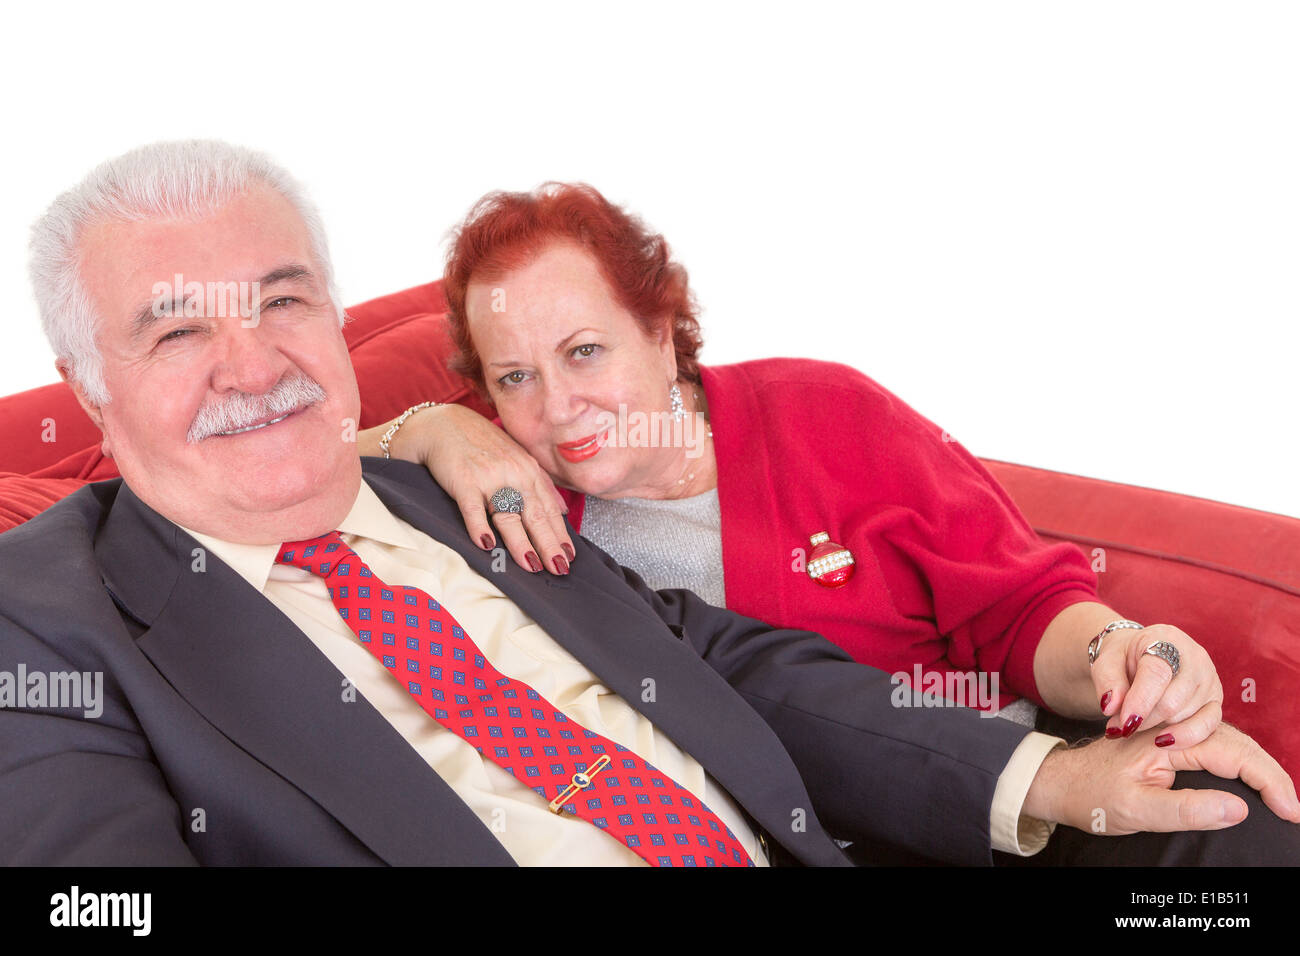 Stylish elderly couple sitting close together side by side on a red sofa looking sideways at the camera with a smile over a whit Stock Photo